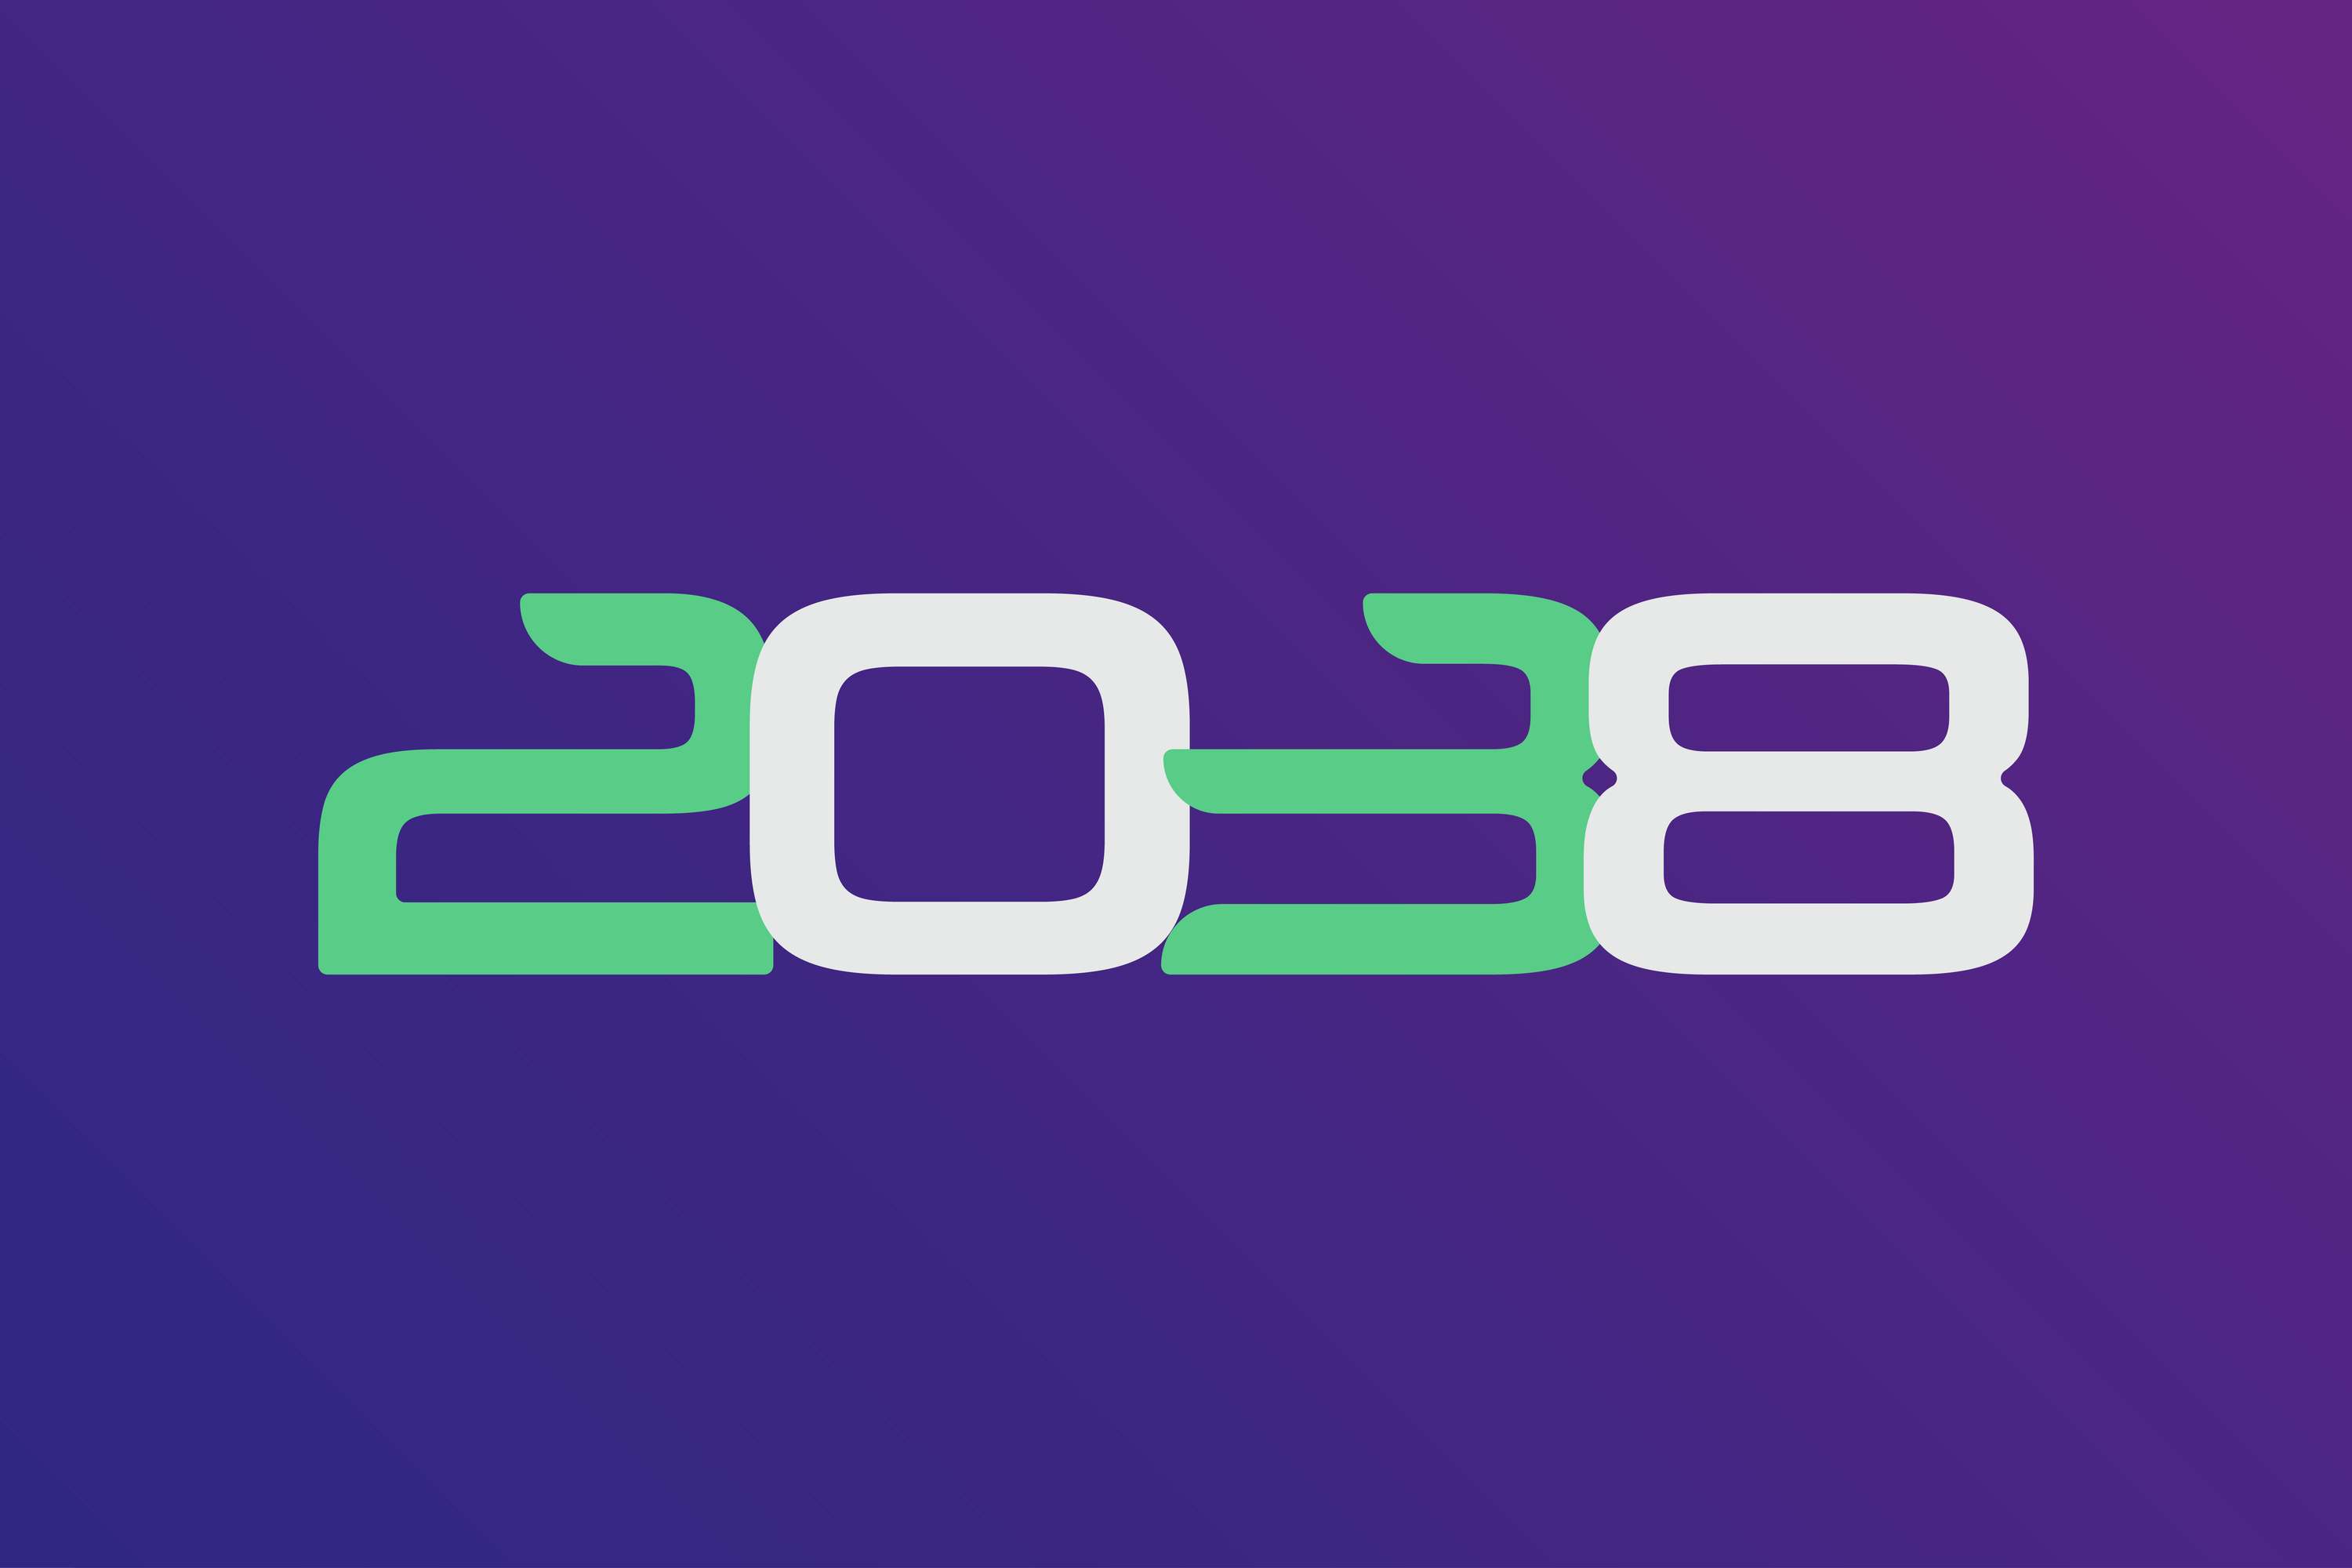 Year 2038 numeric typography text vector design on gradient color background